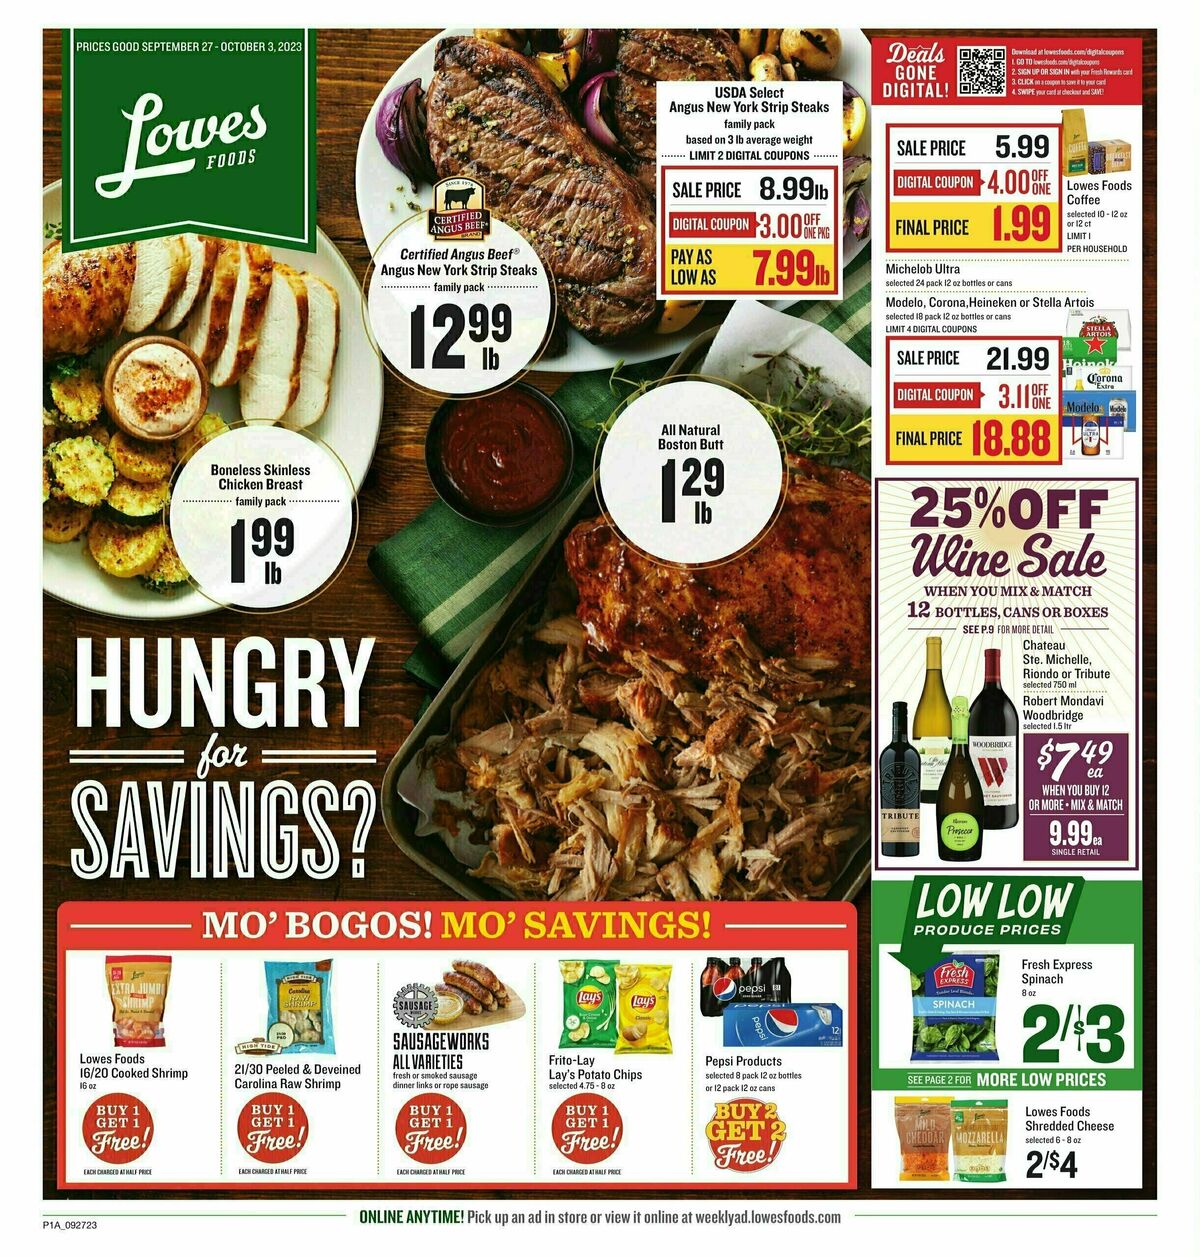 Lowes Foods Weekly Ad from September 27